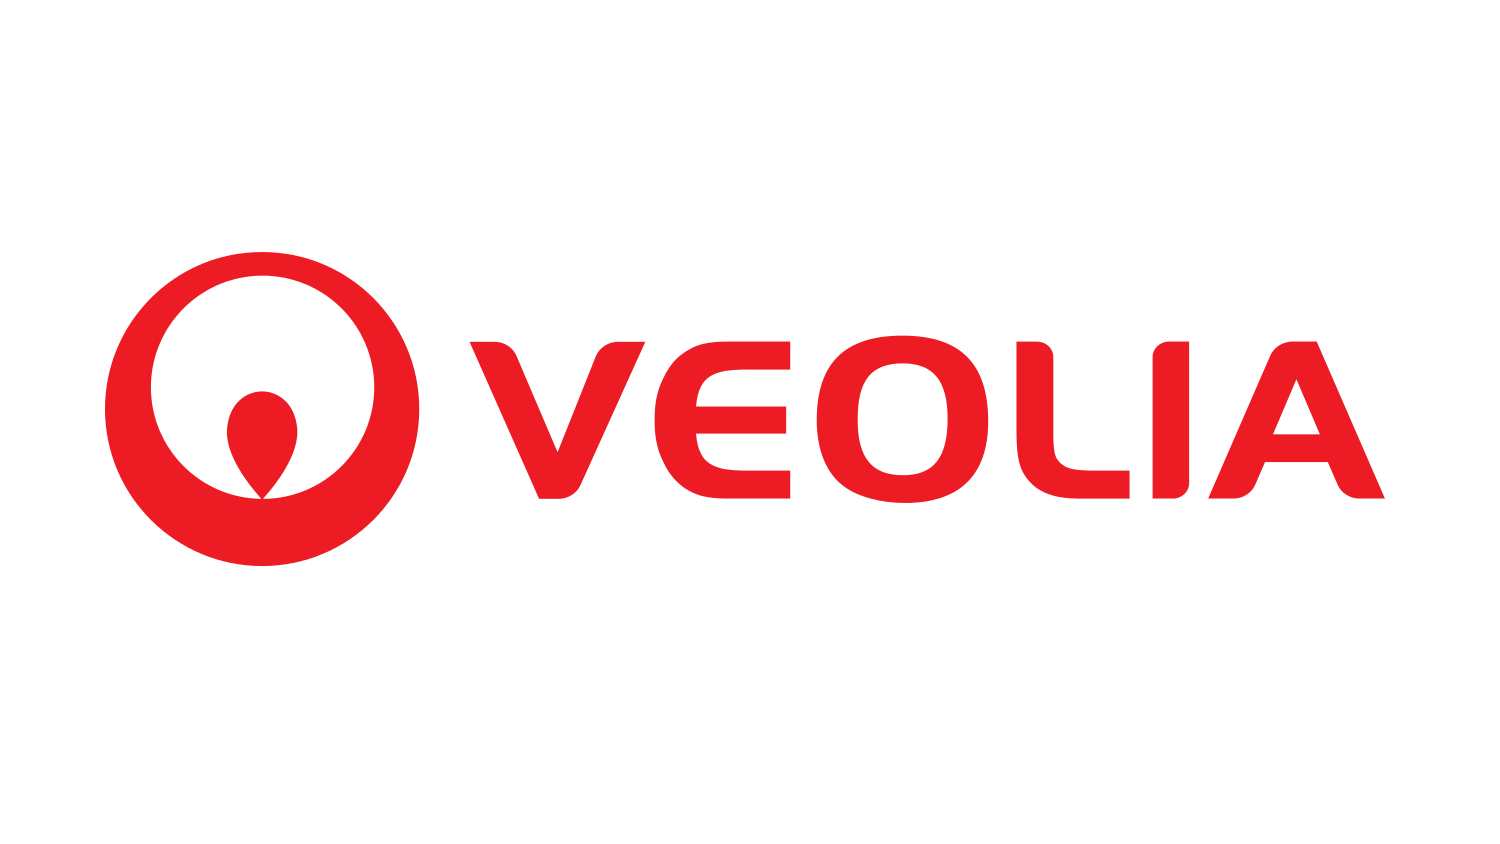 From blades to cement – the experience of Veolia